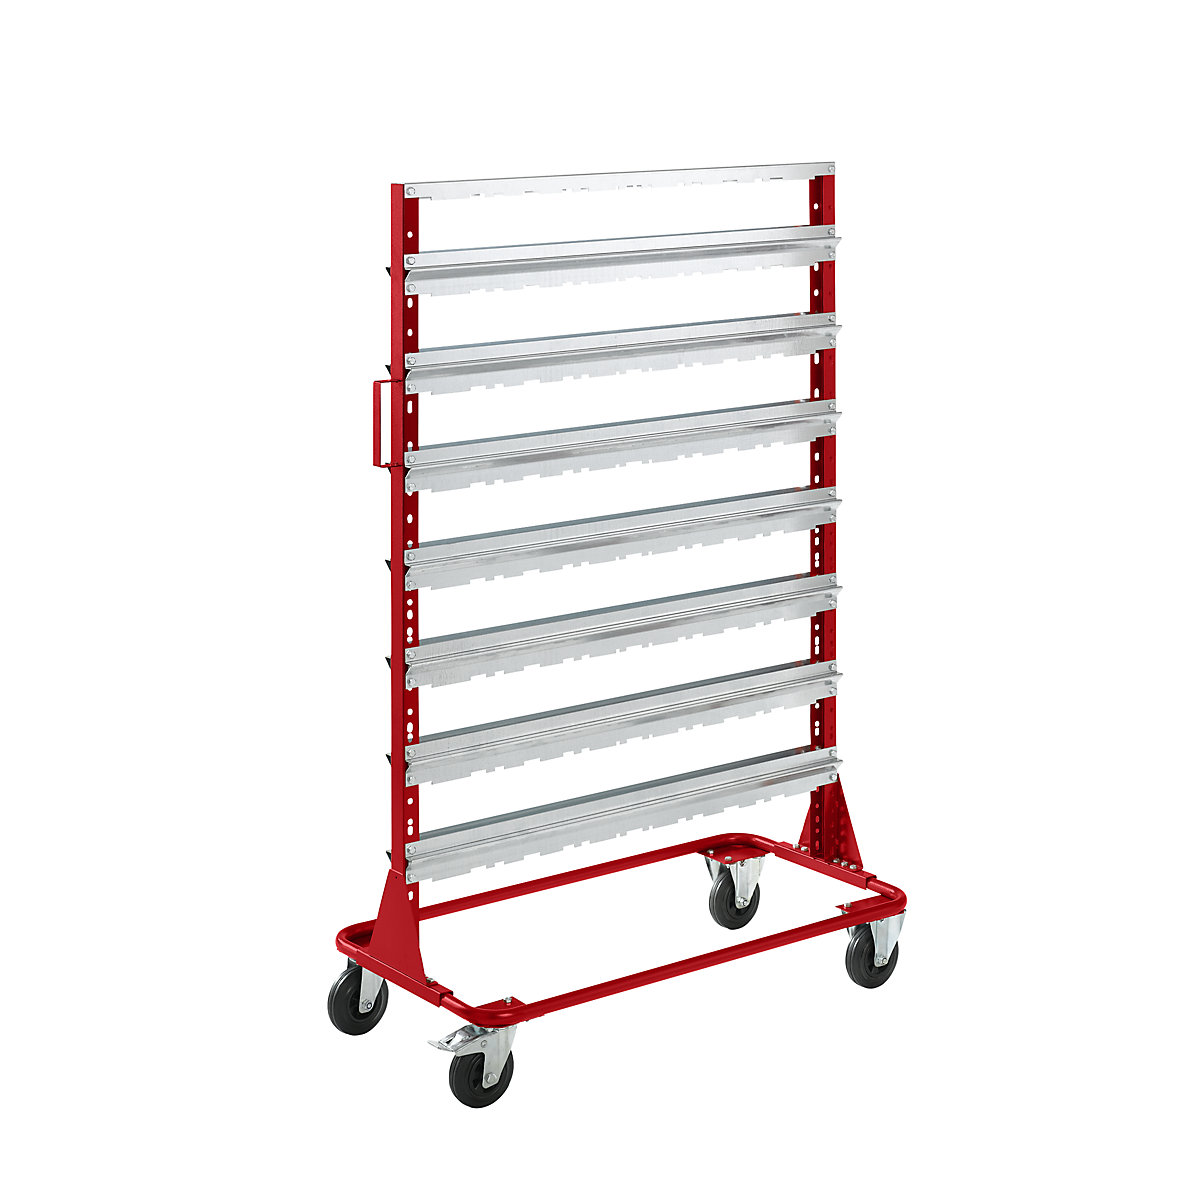 Mobile rack, height 1588 mm, mobile rack for 84 open fronted storage bins, flame red-4